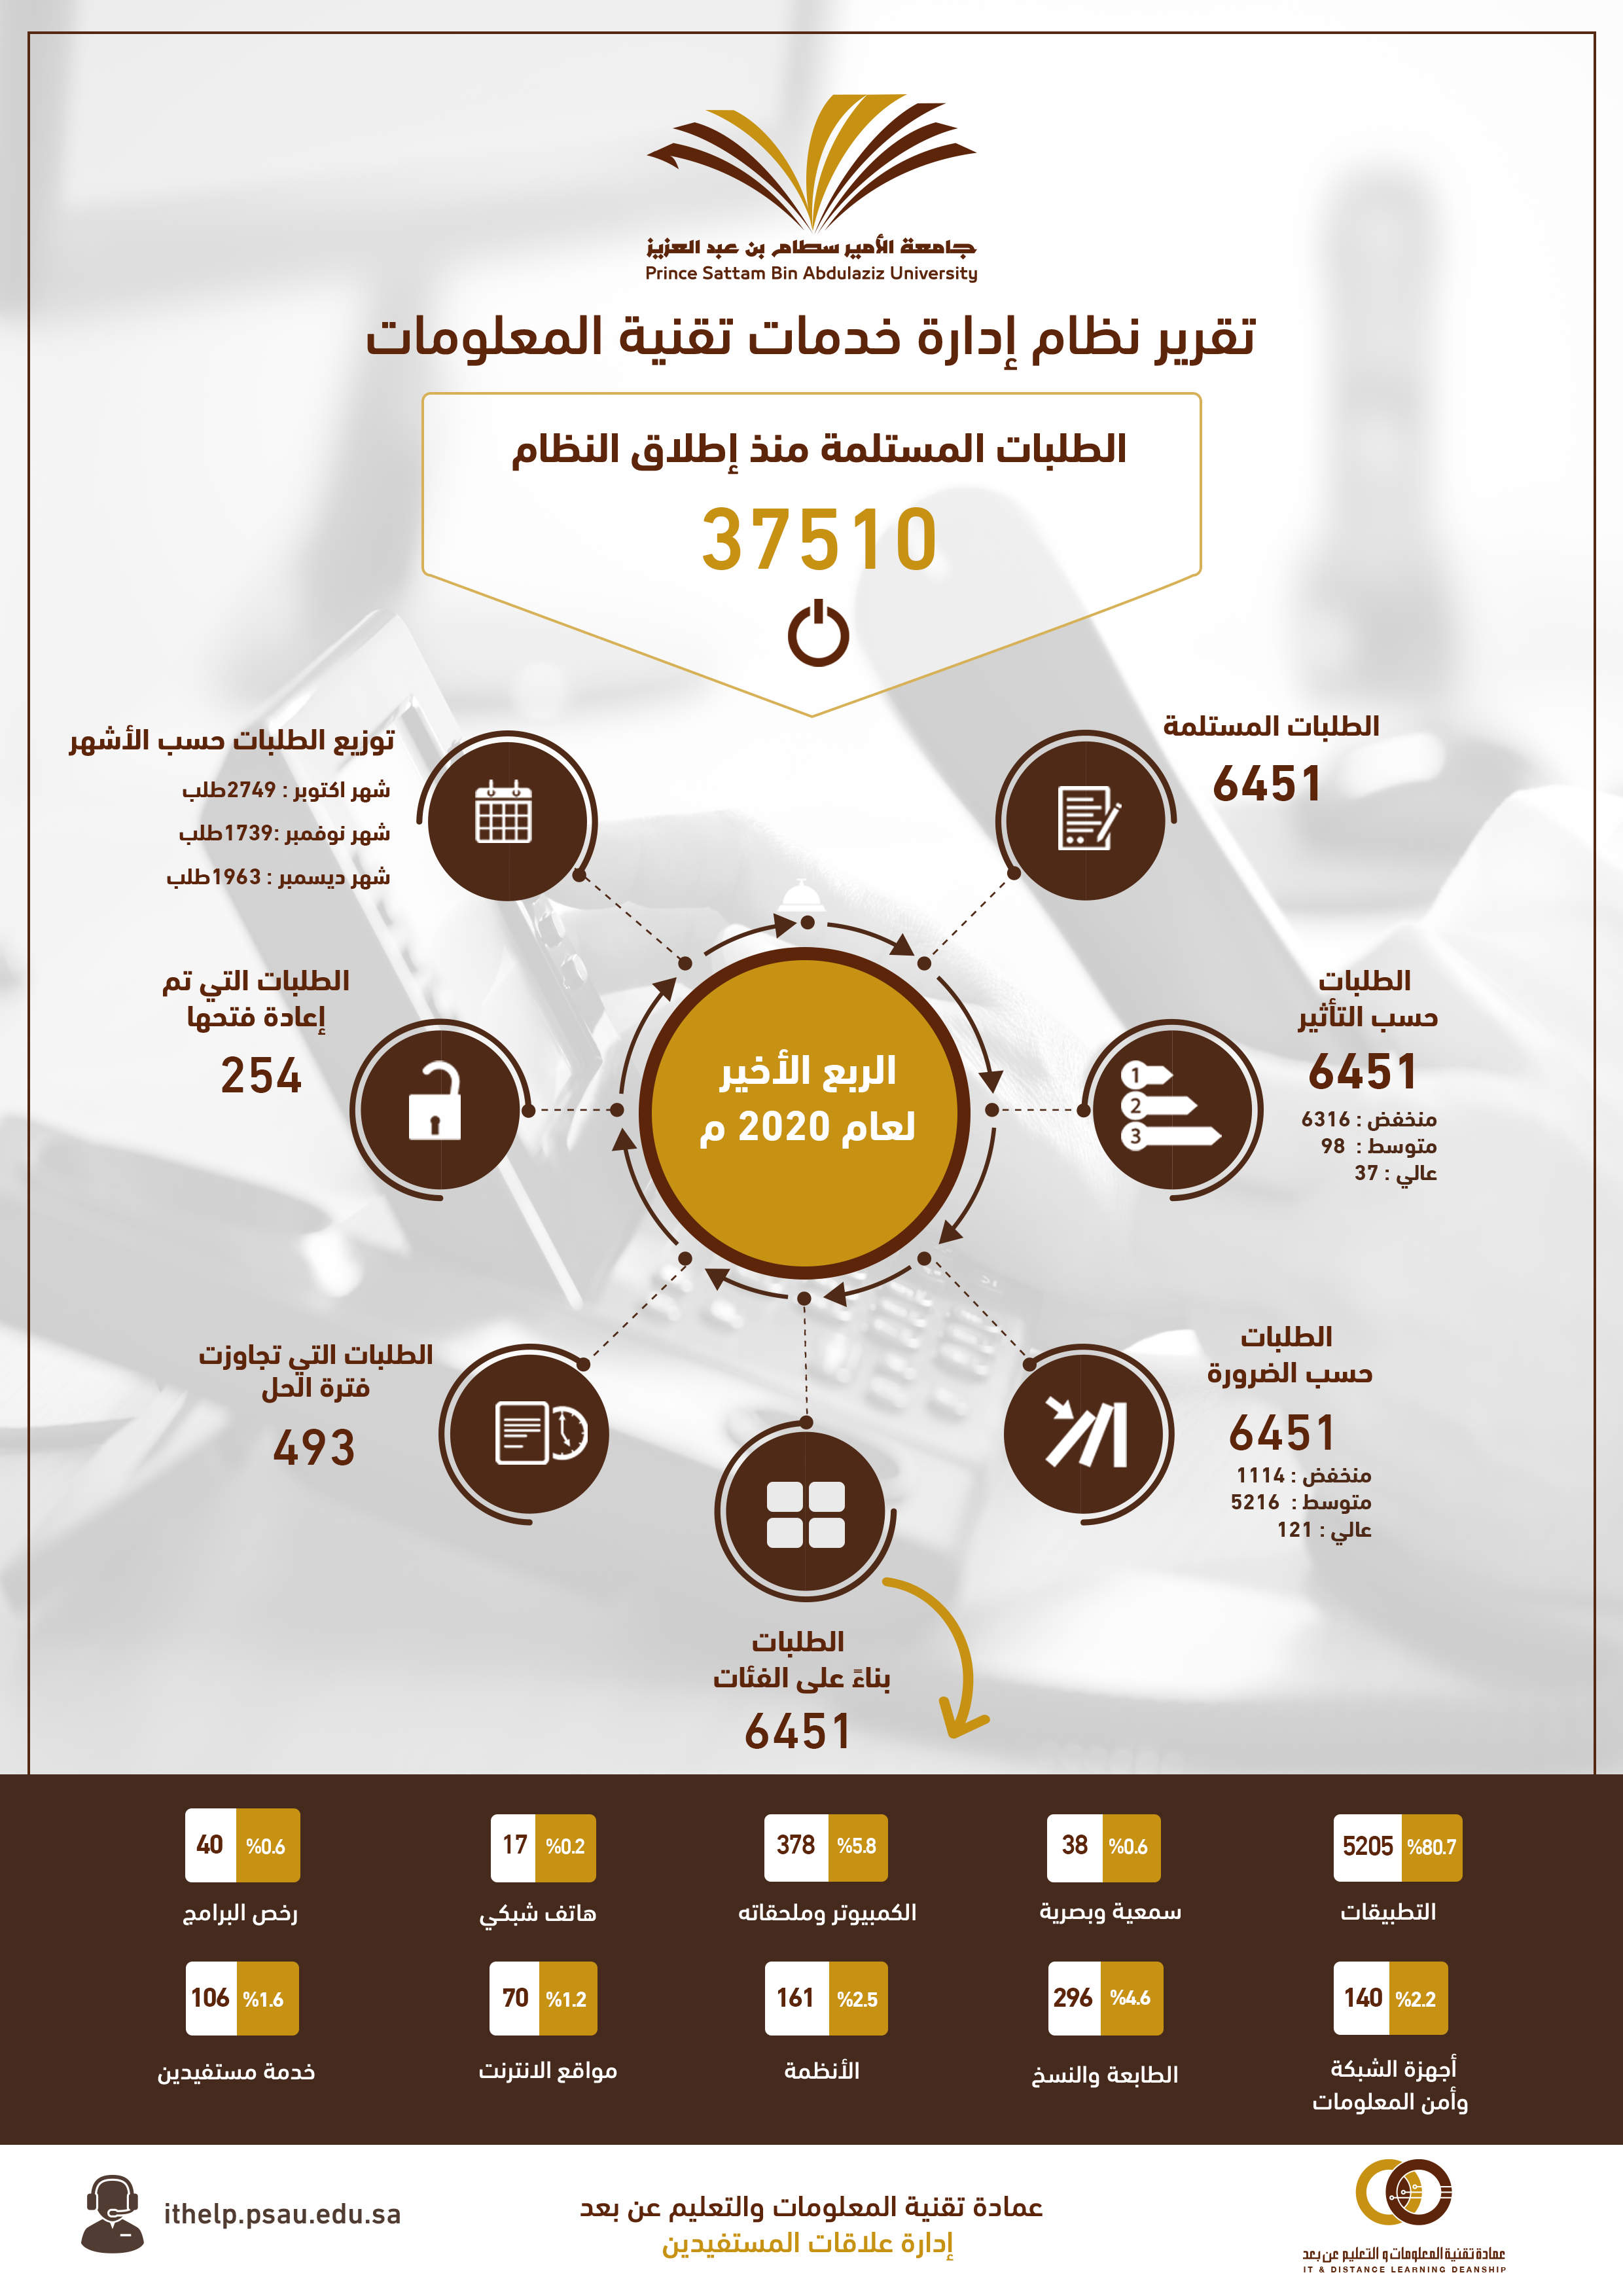 Information Technology Services Management System Report (Technical Support) for the Fourth Quarter of 2020